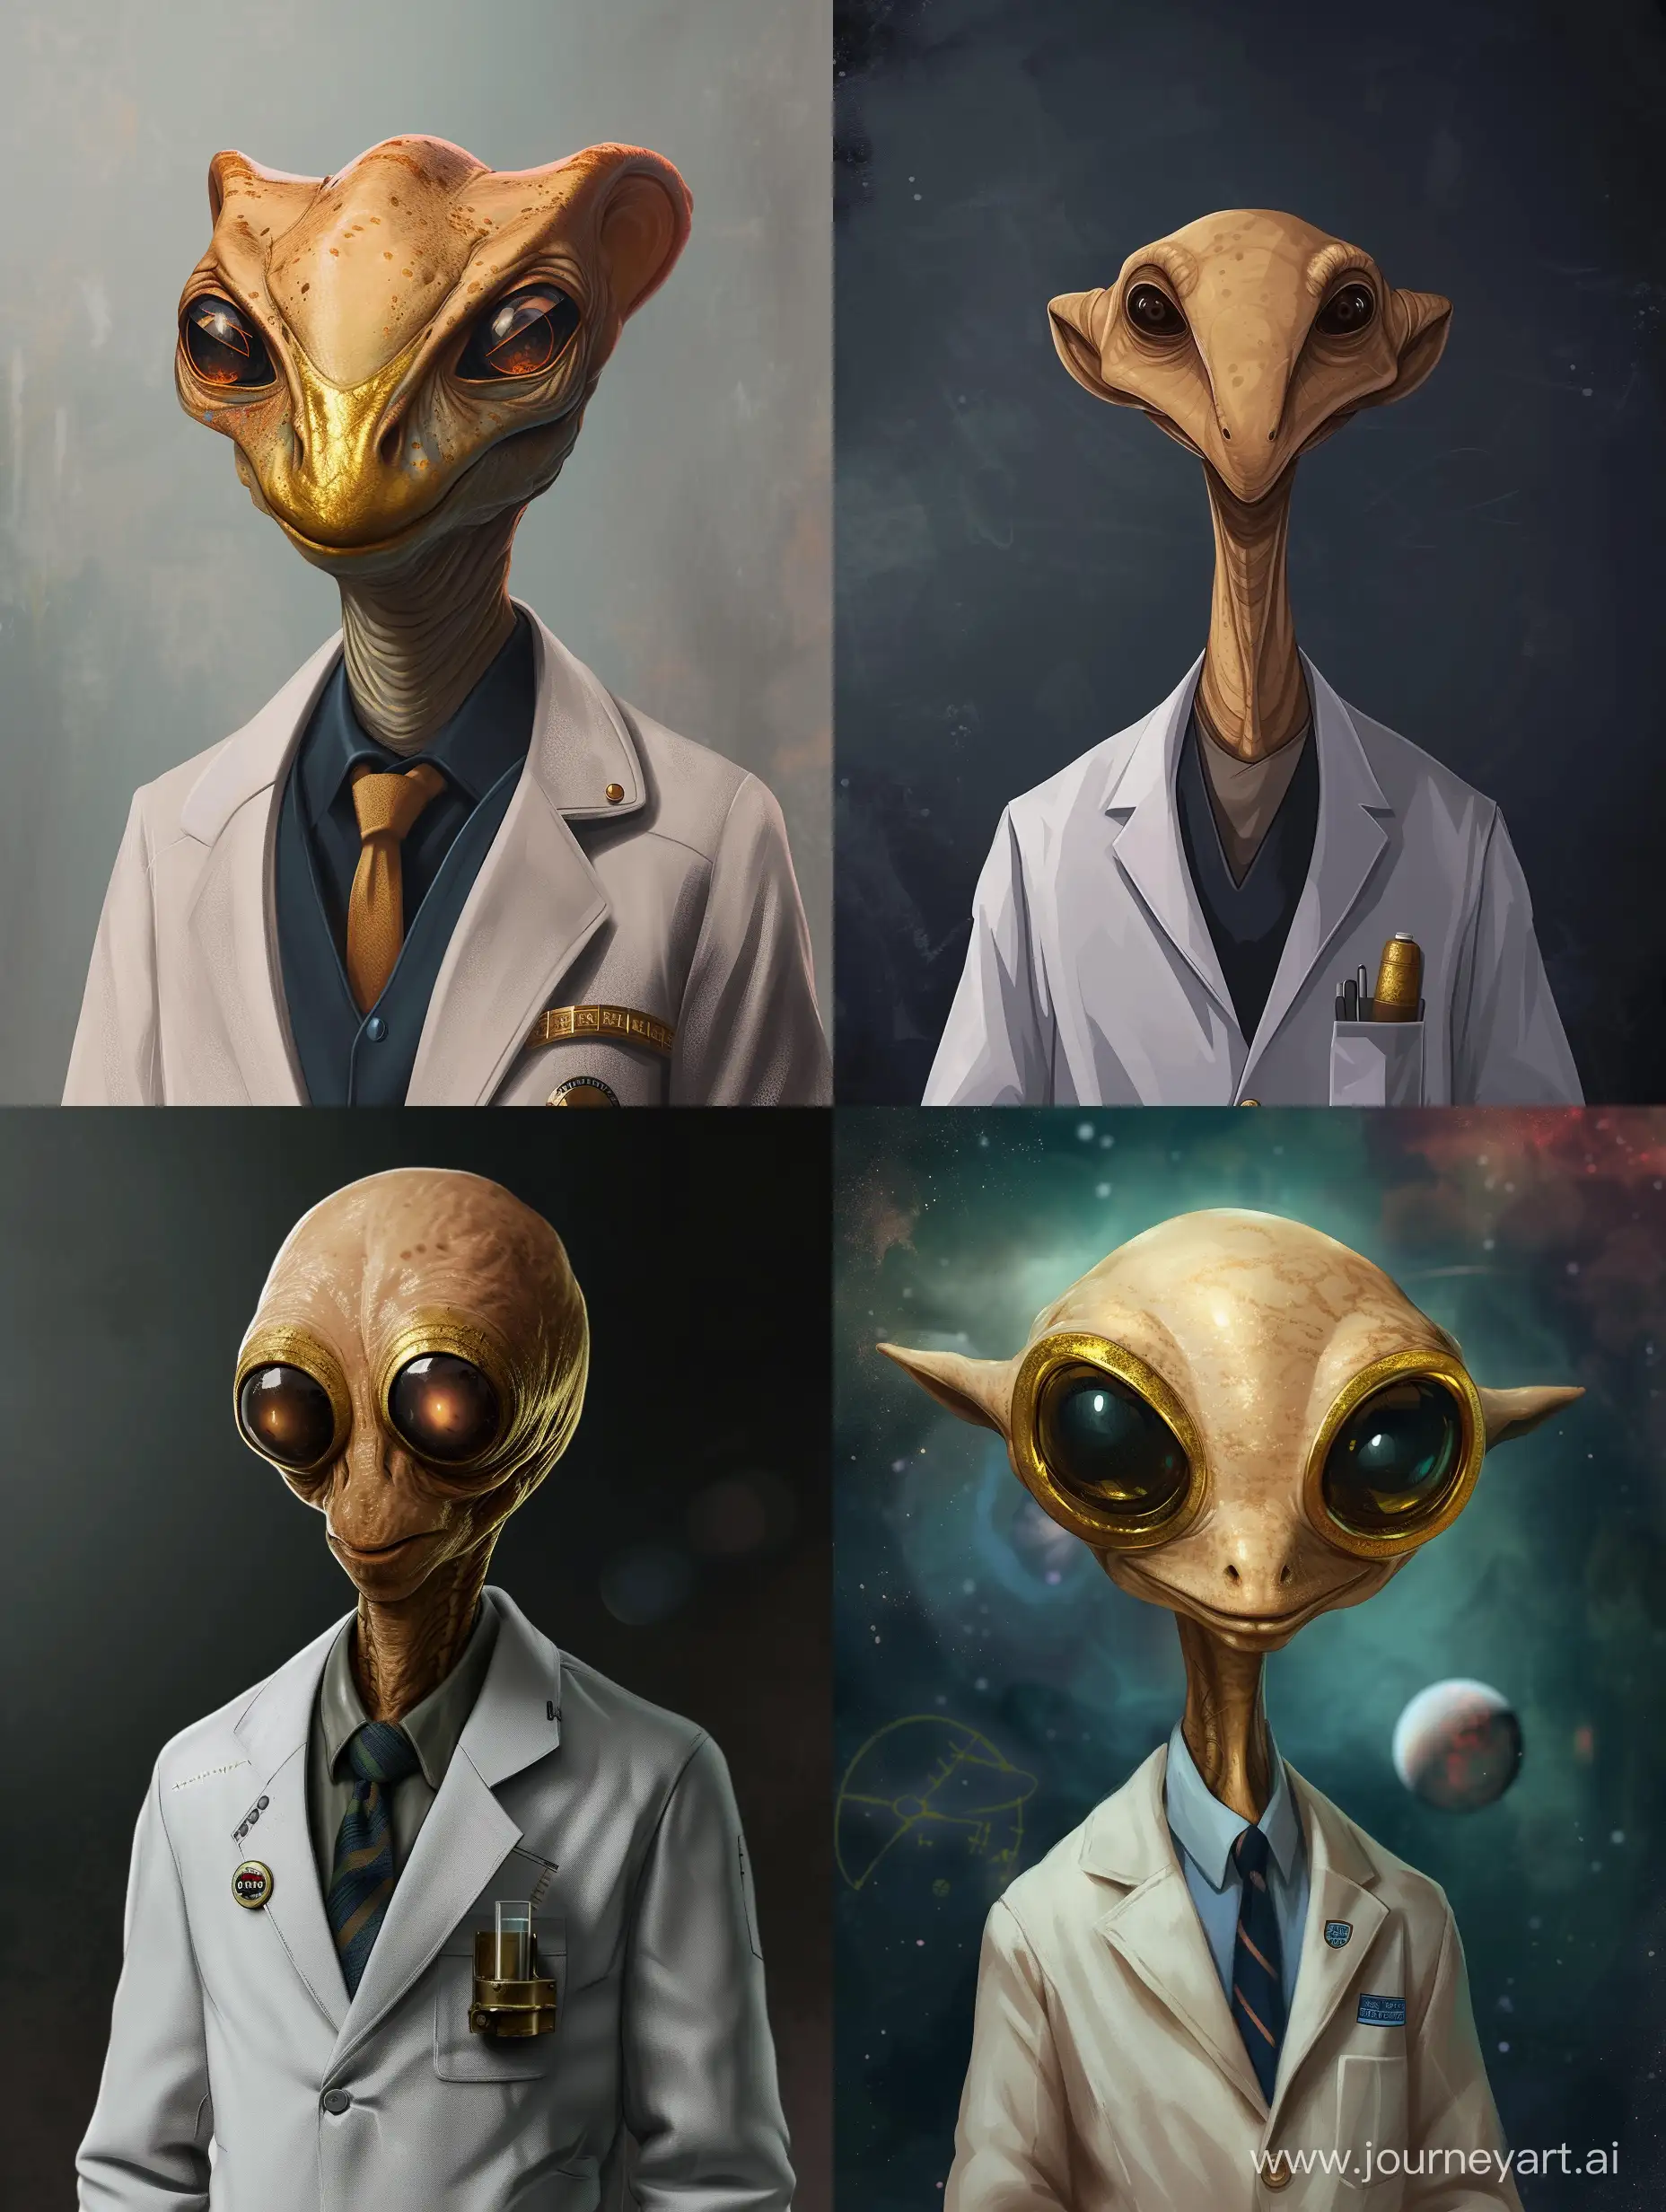 cartoon character reference, creature with tw head, humanization, in science coat, gold mask, portrait